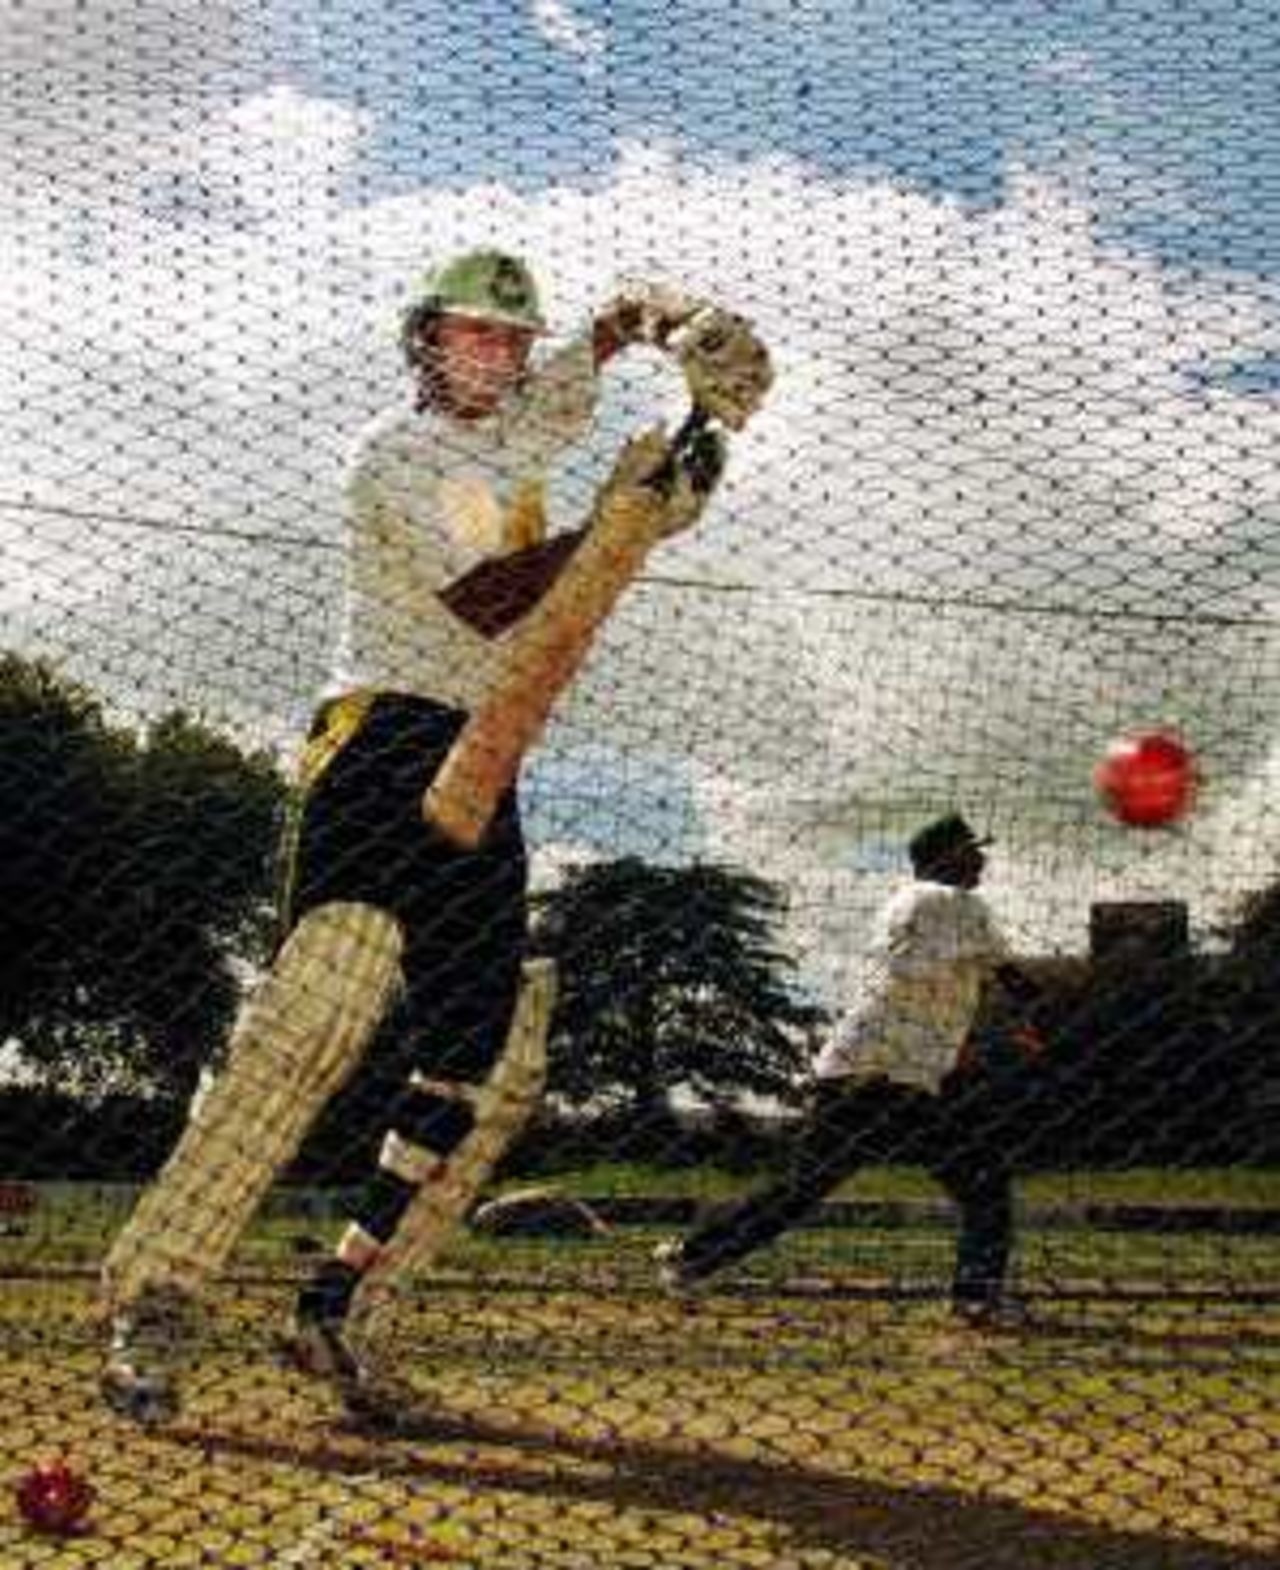 Faisal Iqbal plays a shot, as his uncle and coach Javed Miandad throws balls to a fellow batsman in the nets, day before, 3rd Test at Hamilton, 26 March 2001.